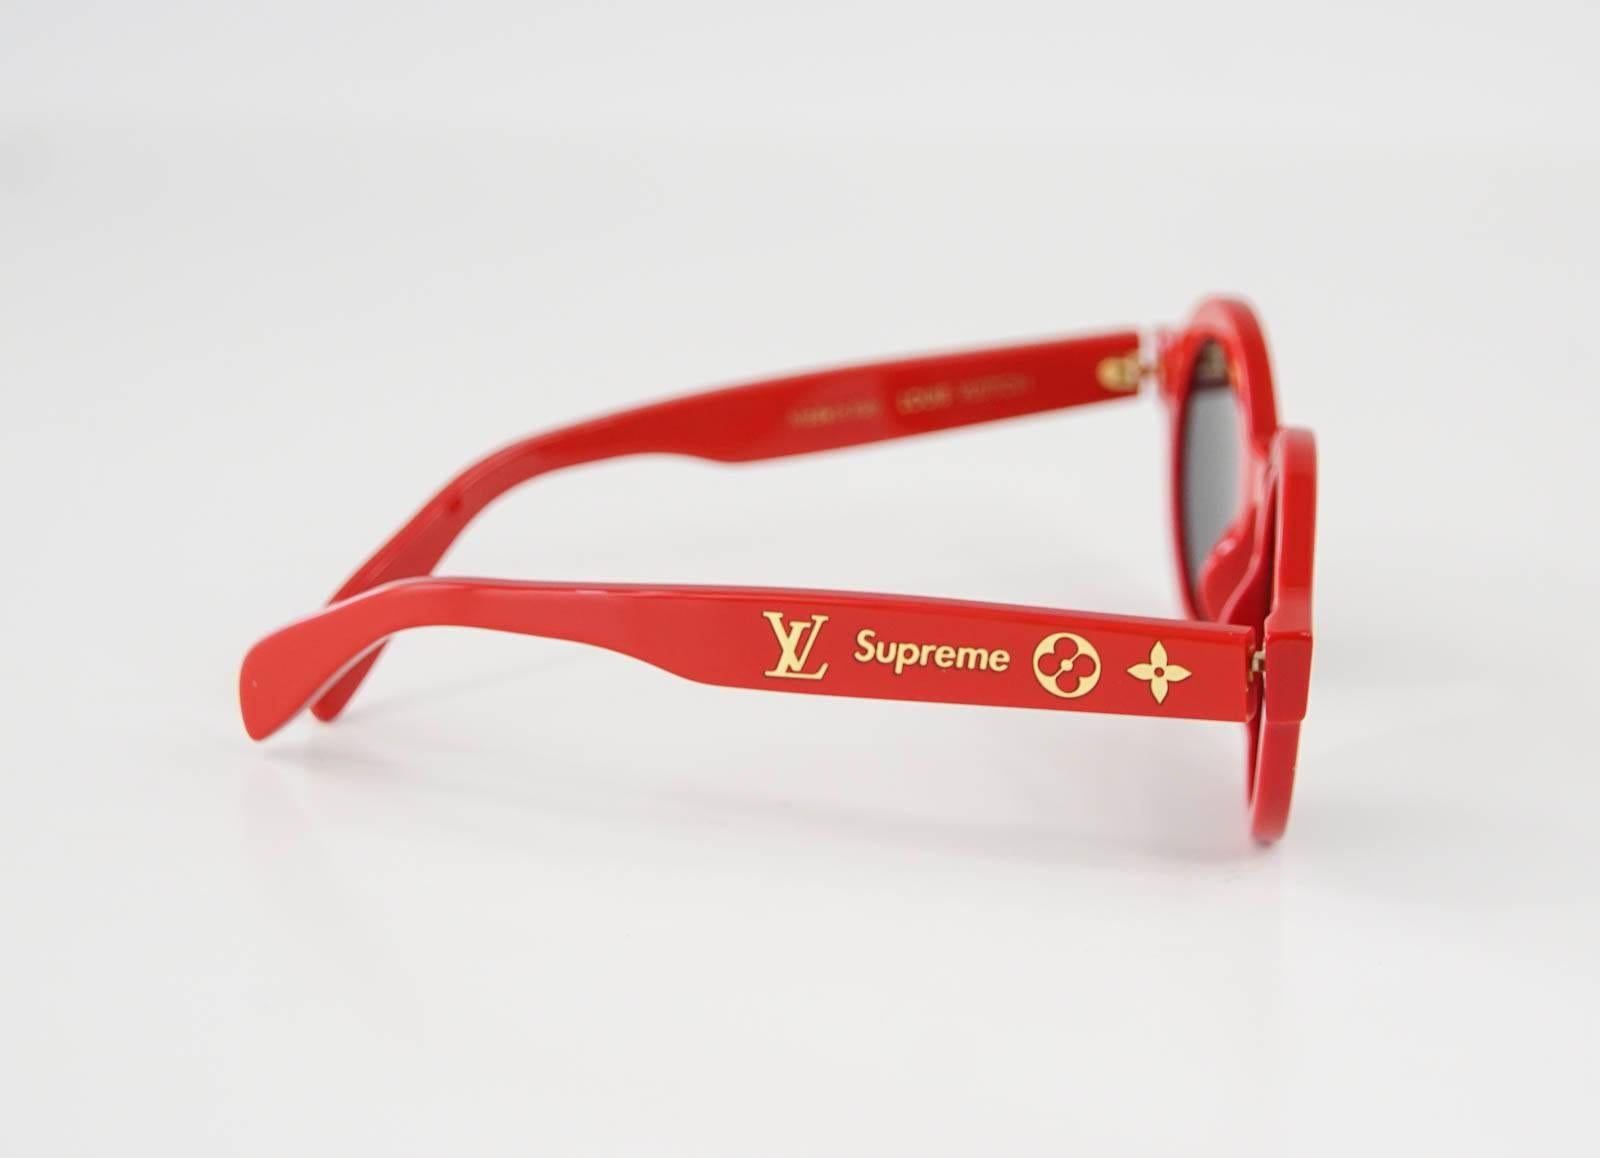 The highly coveted and sought after LOUIS VUITTON X SUPREME Very Limited Edition Red Downtown Sunglasses.
Supreme and Monogram gold embossed.
LV engraved on lens.
Comes with LV gift box, case, microfiber bag and booklet.
NEW or NEVER WORN
See